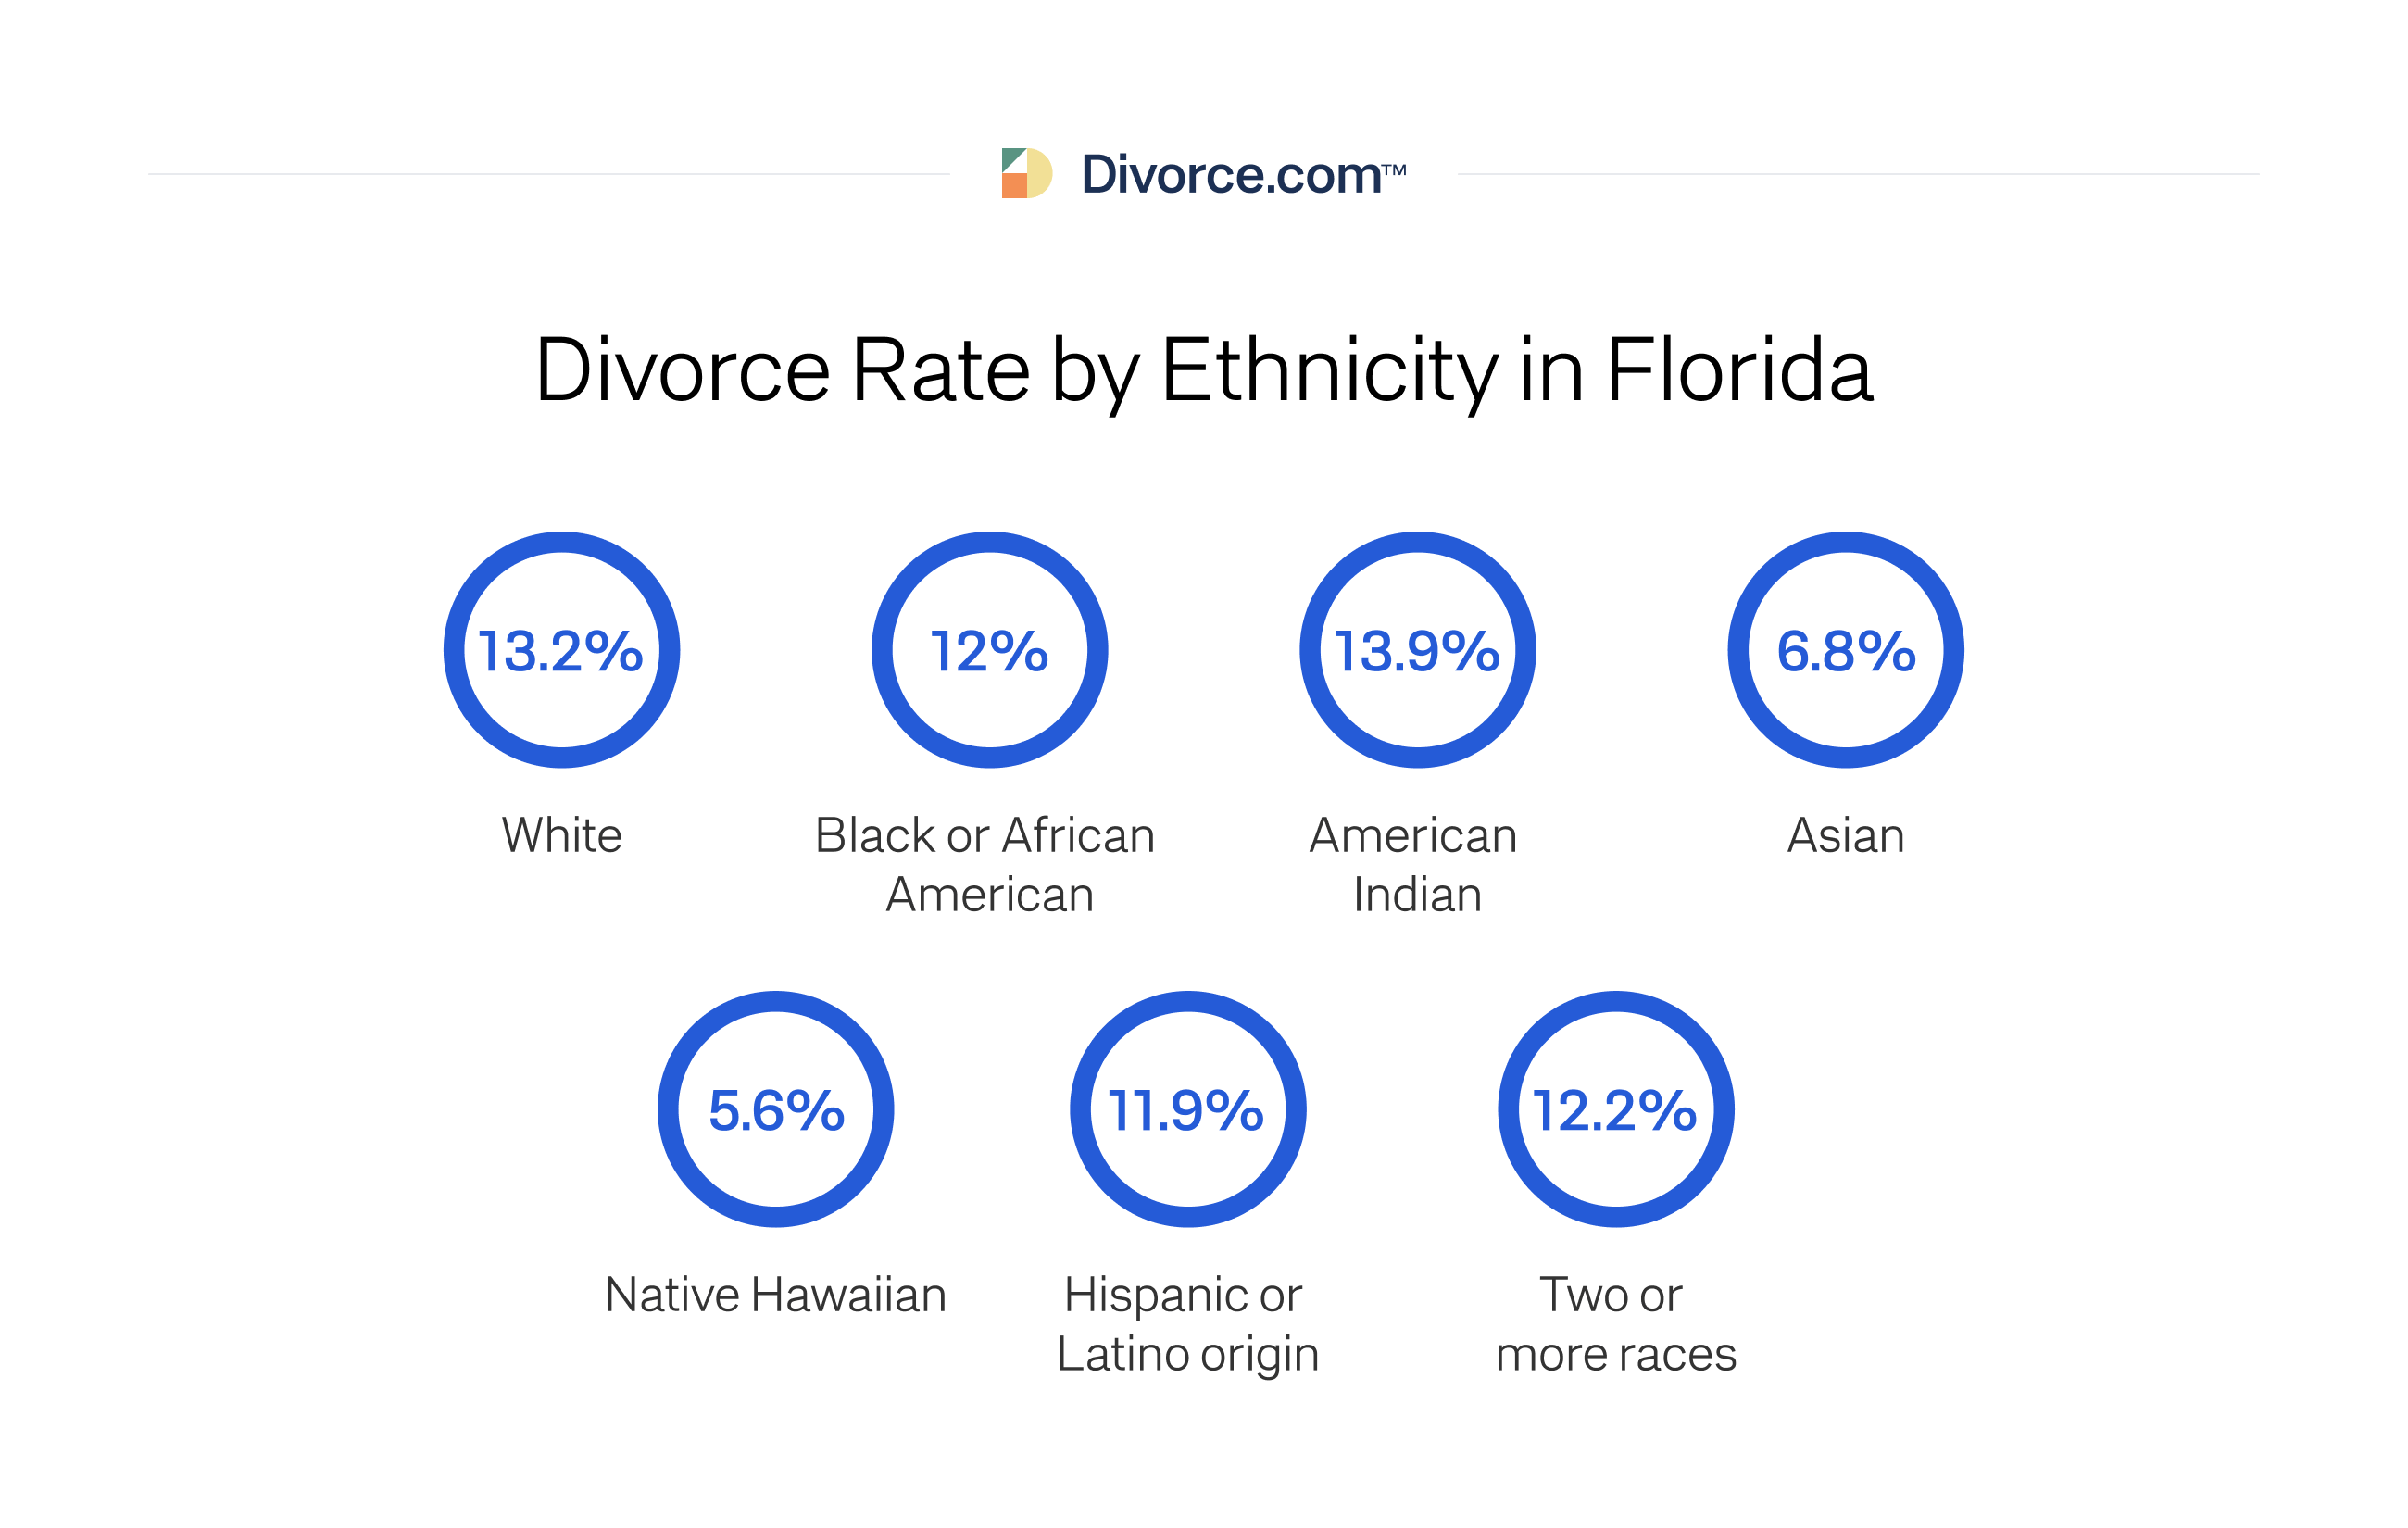 Divorce Rate by Ethnicity in Florida